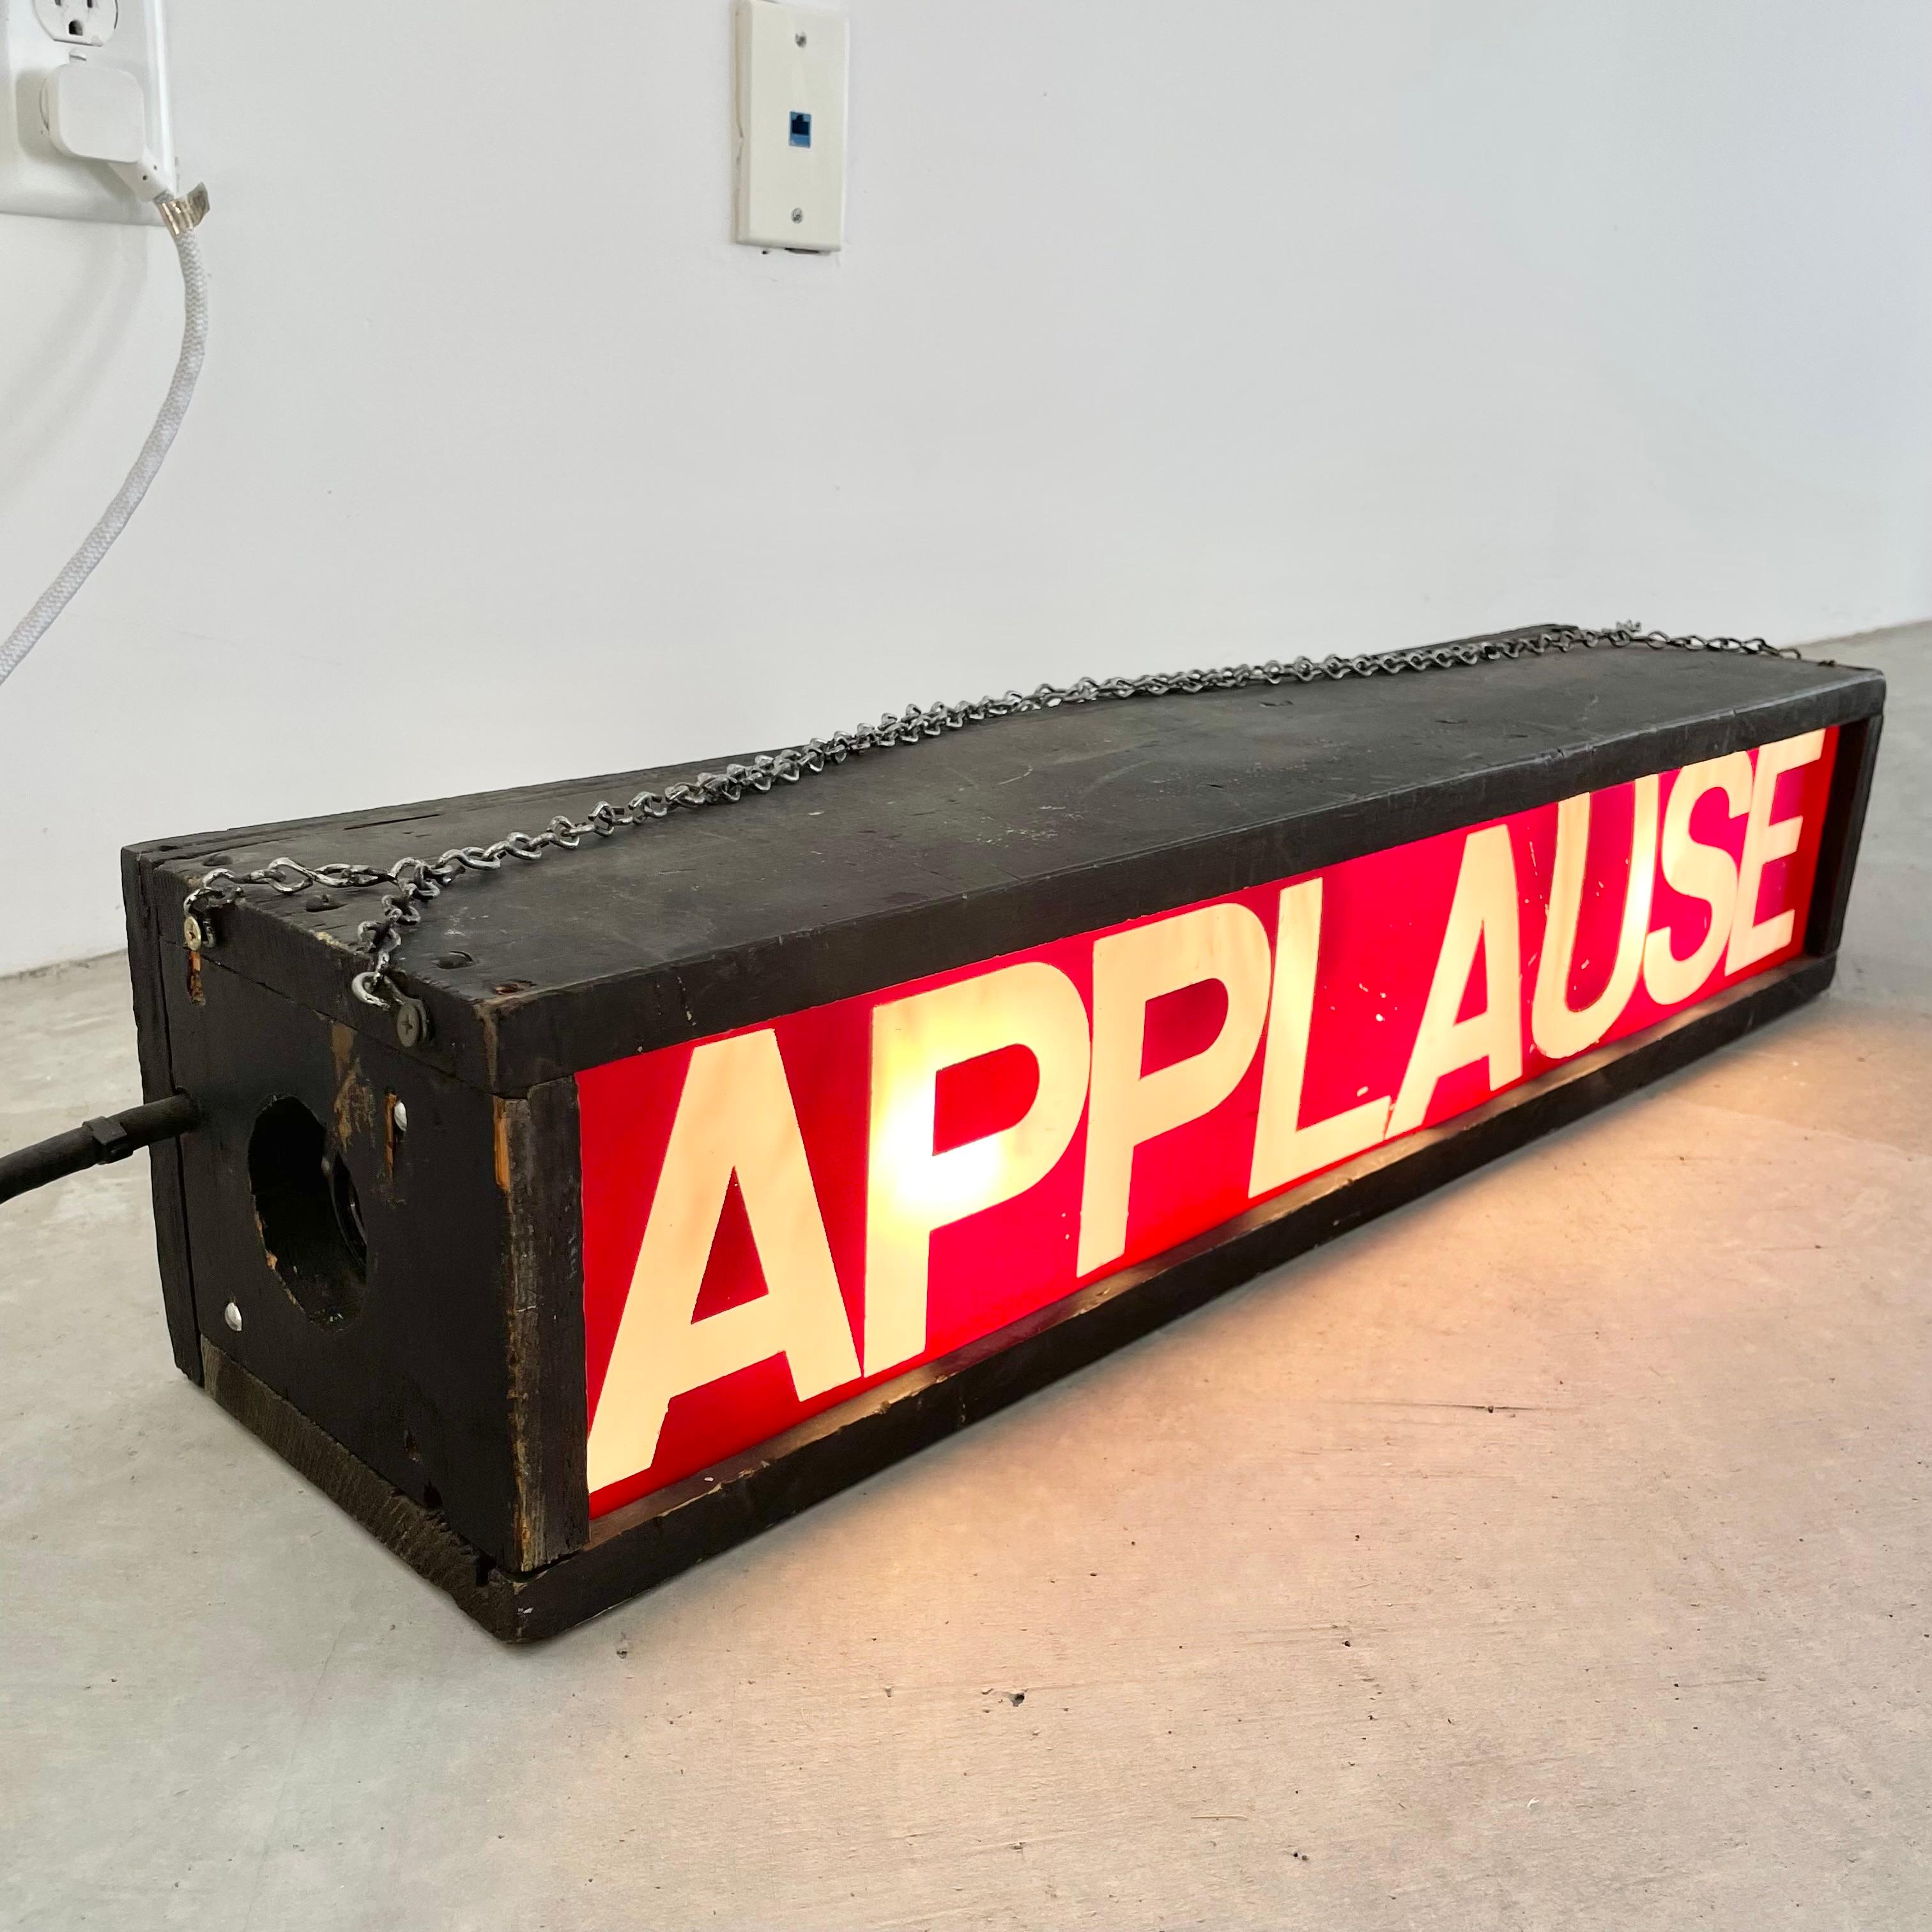 Vintage film studio sign from Los Angeles. 28 inches long. Wooden light box painted in a matte black with red and clear acrylic APPLAUSE sign. Fluorescent light inside. Used in a live studio telling the audience when to applaud. Sticker on the back